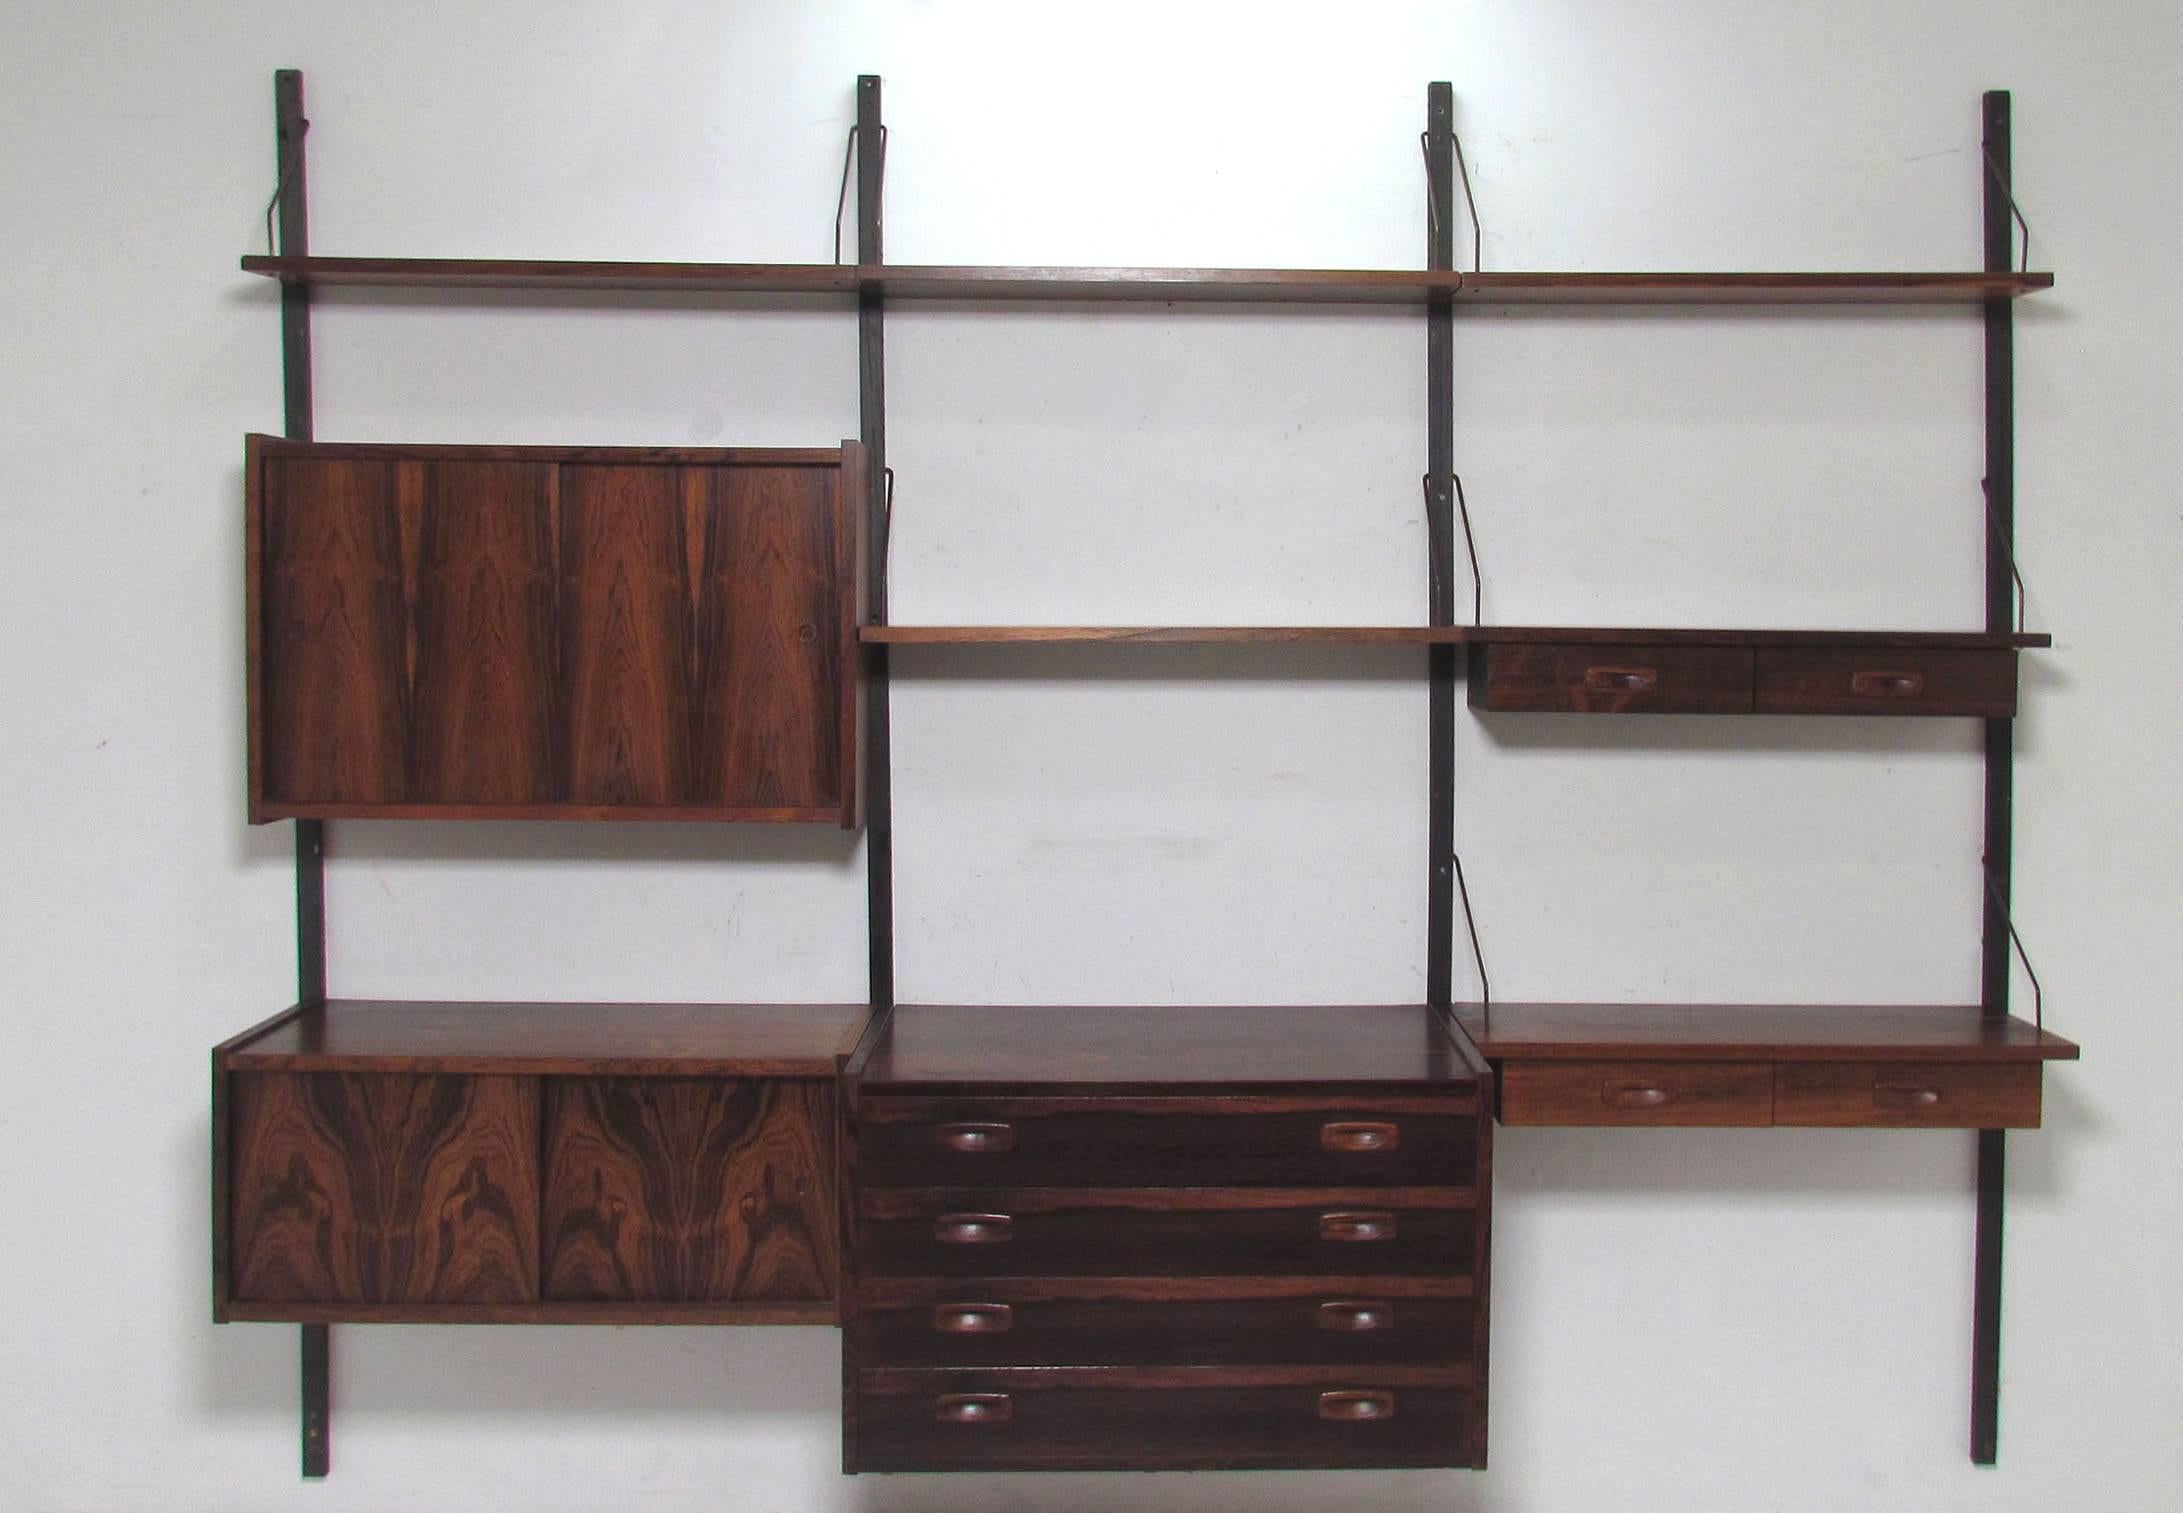 Danish rosewood wall-mounted shelving unit designed by Preben Sorensen, PS System for Randers, circa 1960s. Three bay unit consists of cabinets, drawer space and shelving. 

All components are 31 3/8